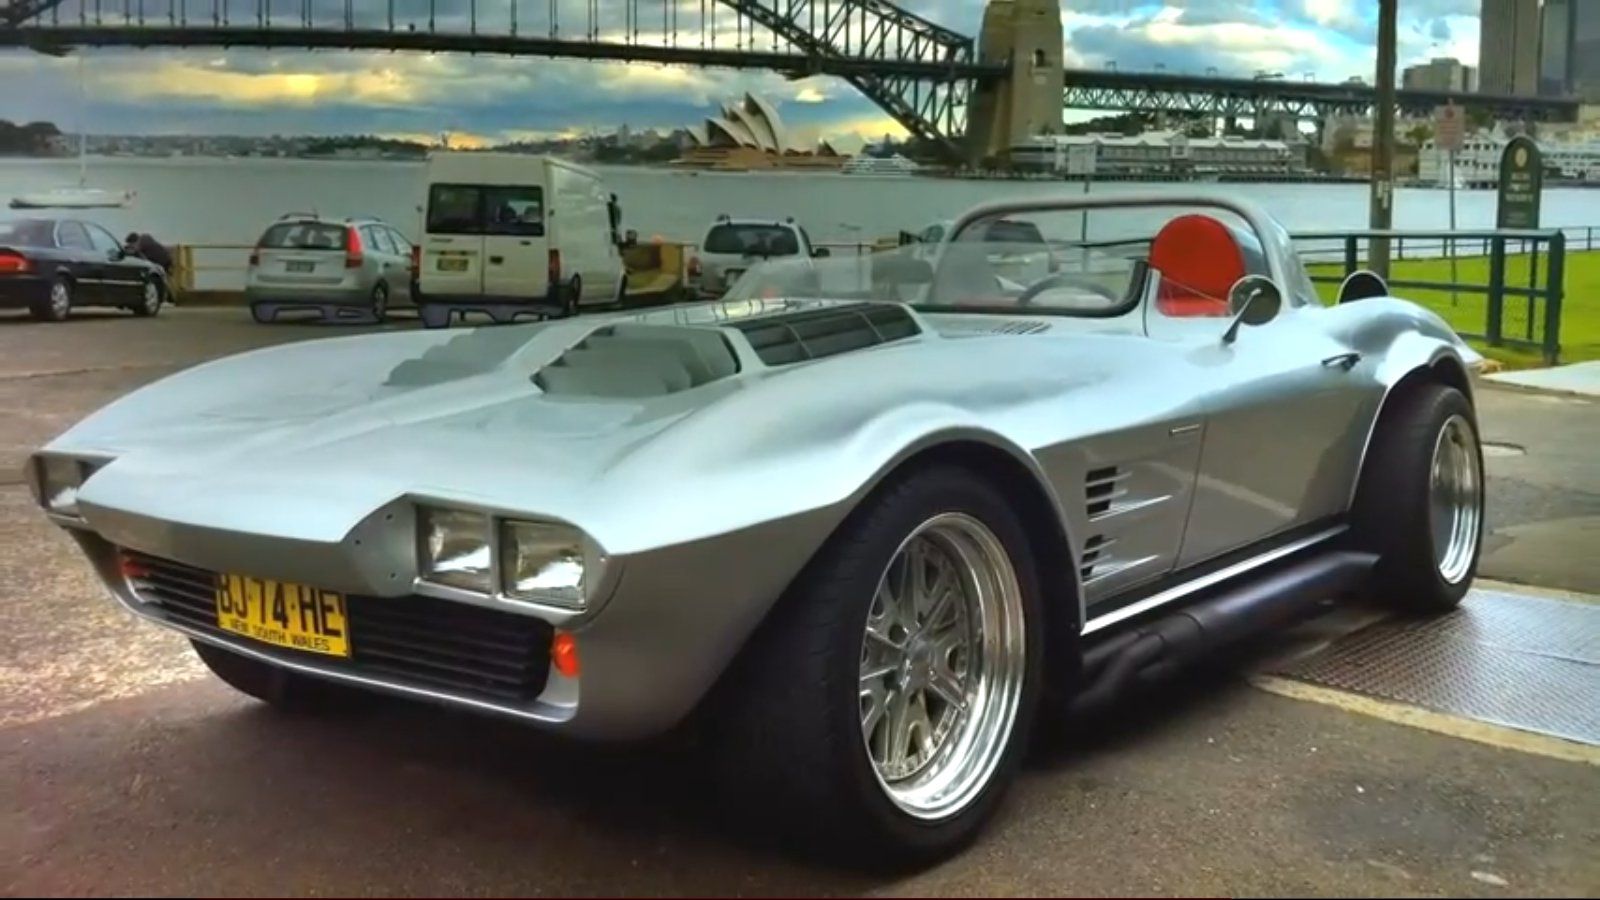 Chevrolet Corvette Grand Sport Replica, prices, ratings with various photo